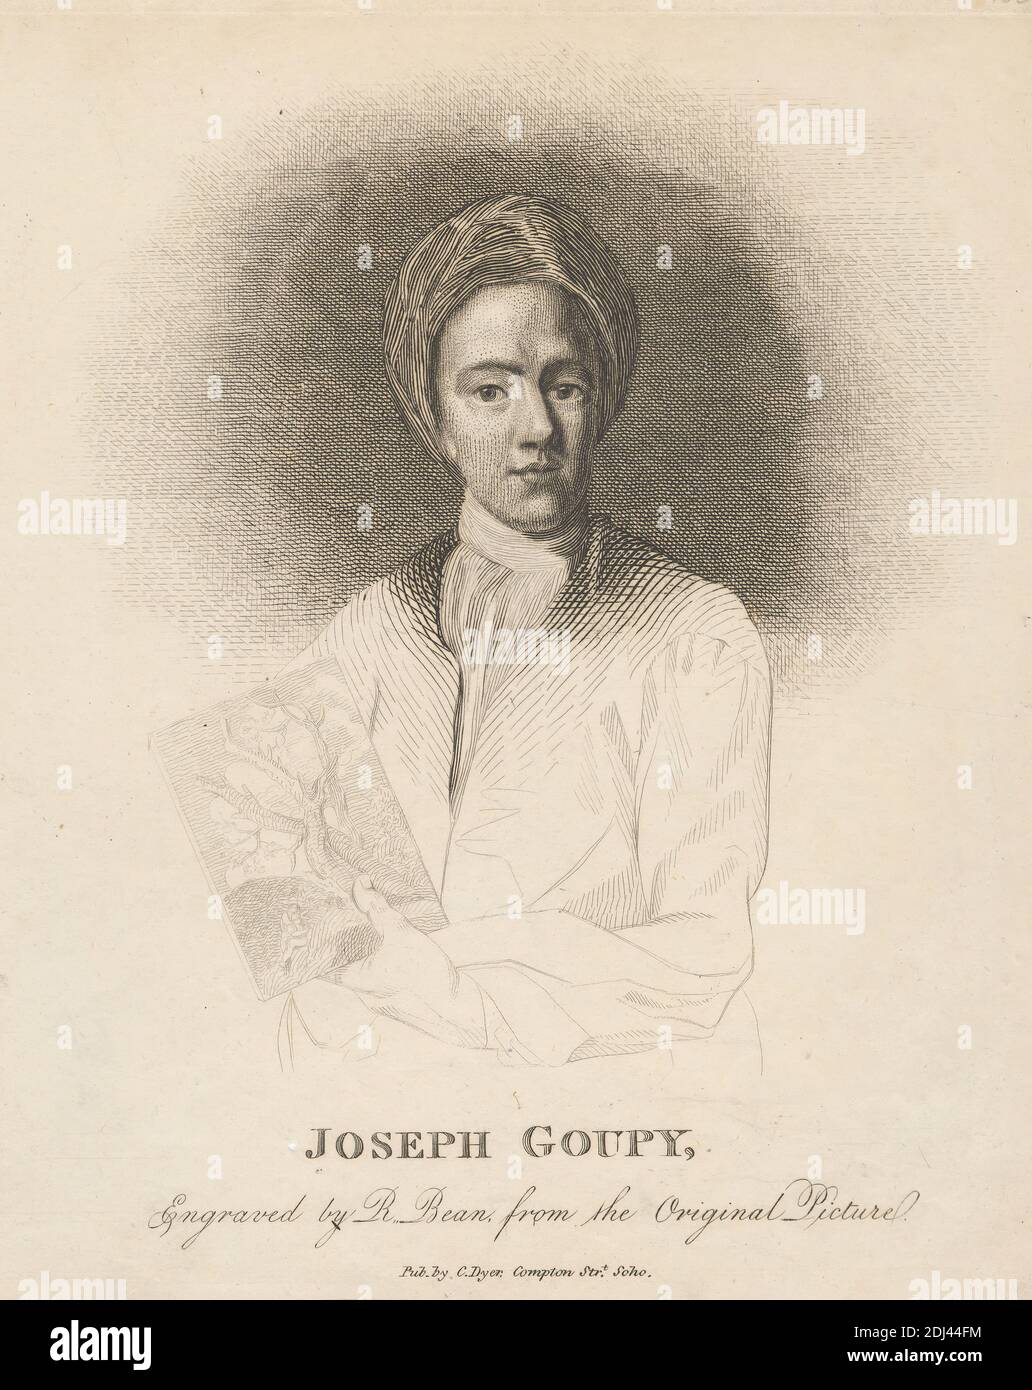 Joseph Goupy, Print made by Richard Bean, 1792–1817, after Michael Dahl, 1656–1743, Swedish, active in Britain (from 1682), Published by C. Dyer, active ca. 1810, British, between 1807 and 1817, Line engraving on medium, moderately textured, cream wove paper, Sheet: 9 3/4 x 7 11/16 inches (24.7 x 19.6 cm), Plate: 9 x 7 11/16 inches (22.9 x 19.6 cm), and Image: 7 5/16 x 6 5/8 inches (18.5 x 16.8 cm), artist, coat, etcher, etching (printing process), holding, painter, portrait, turban Stock Photo